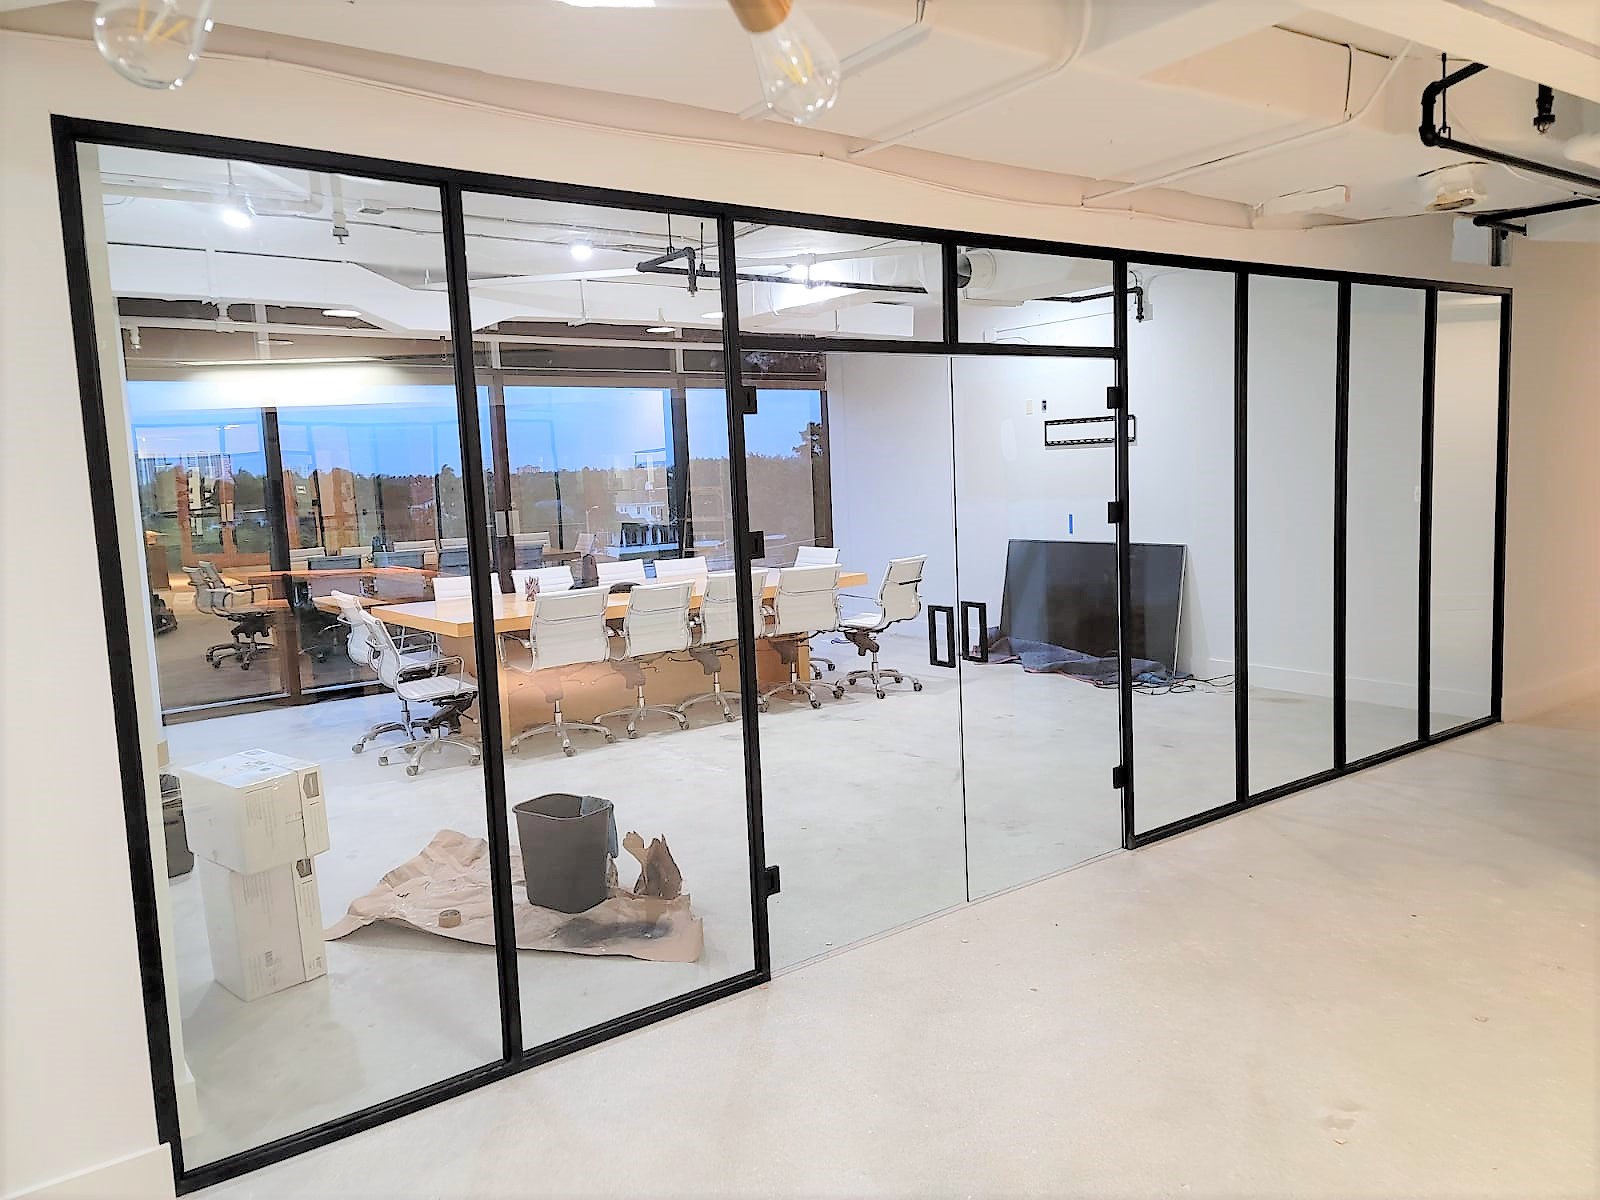 Glass Room Divider A Solution To The